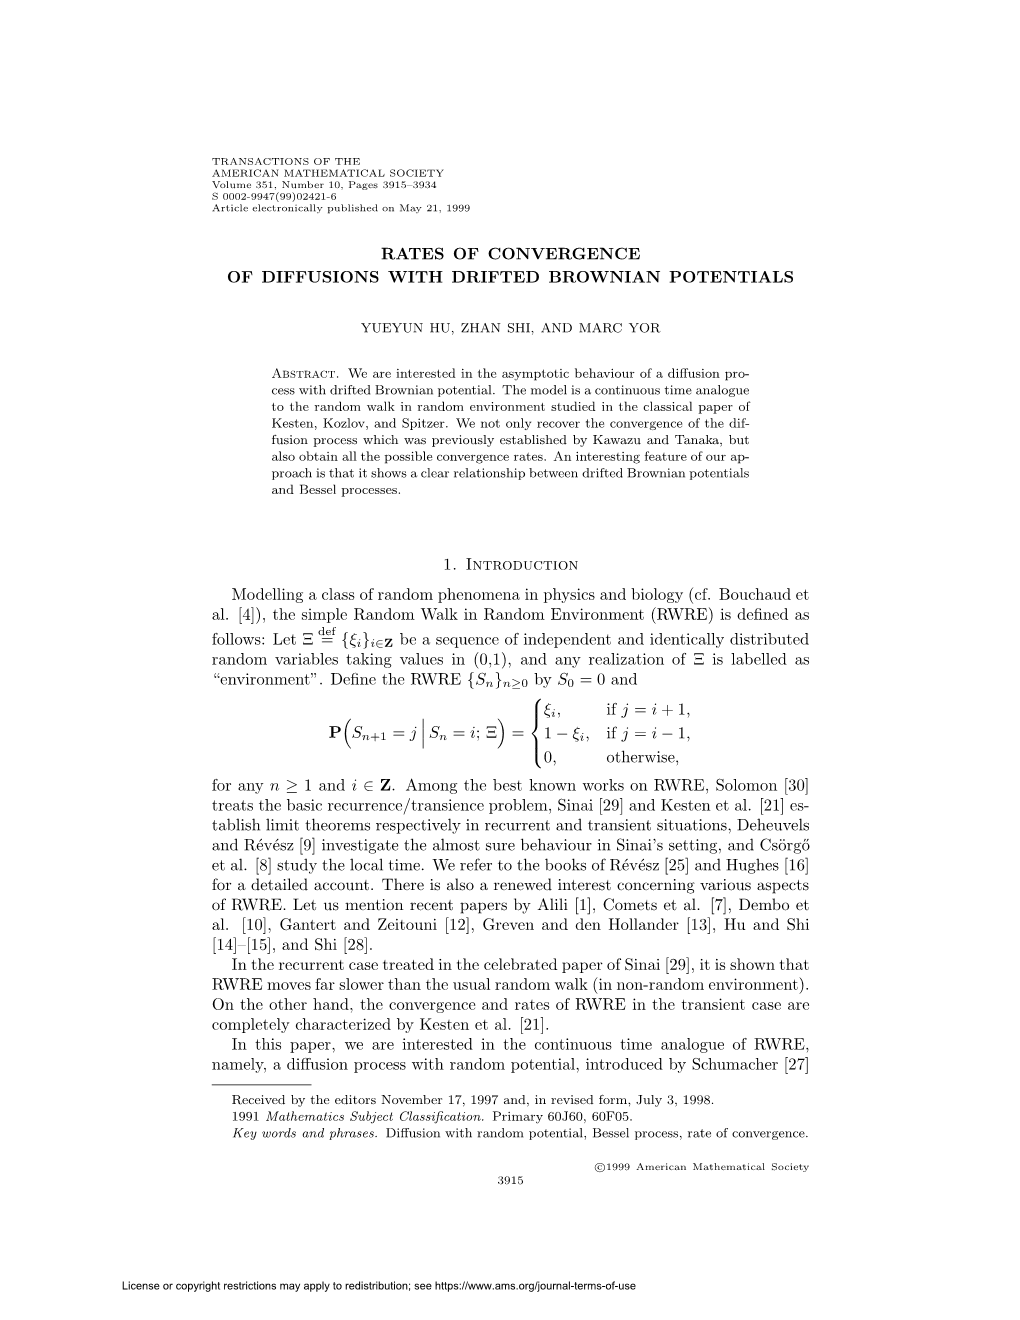 Rates of Convergence of Diffusions with Drifted Brownian Potentials